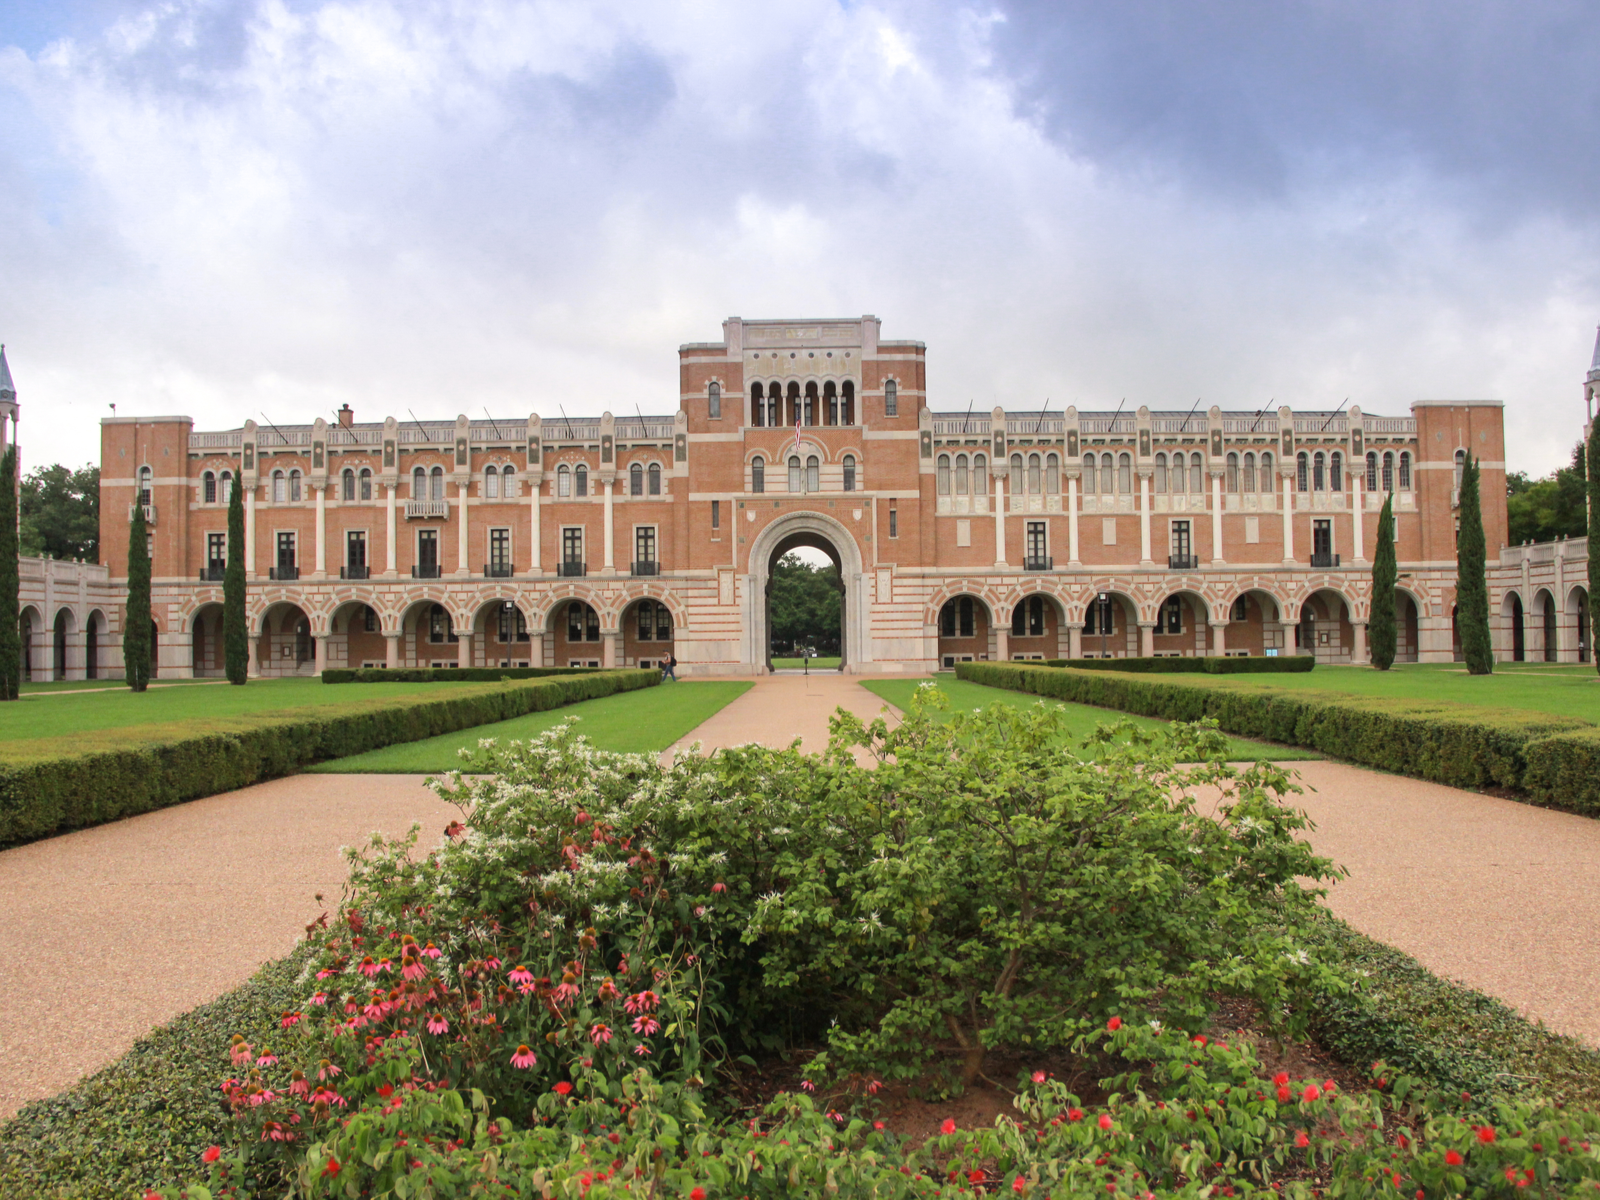 A wide building with an arch gate facing a beautiful landscape with trimmed bushes at Rice University in Texas, one of the most beautiful college campuses